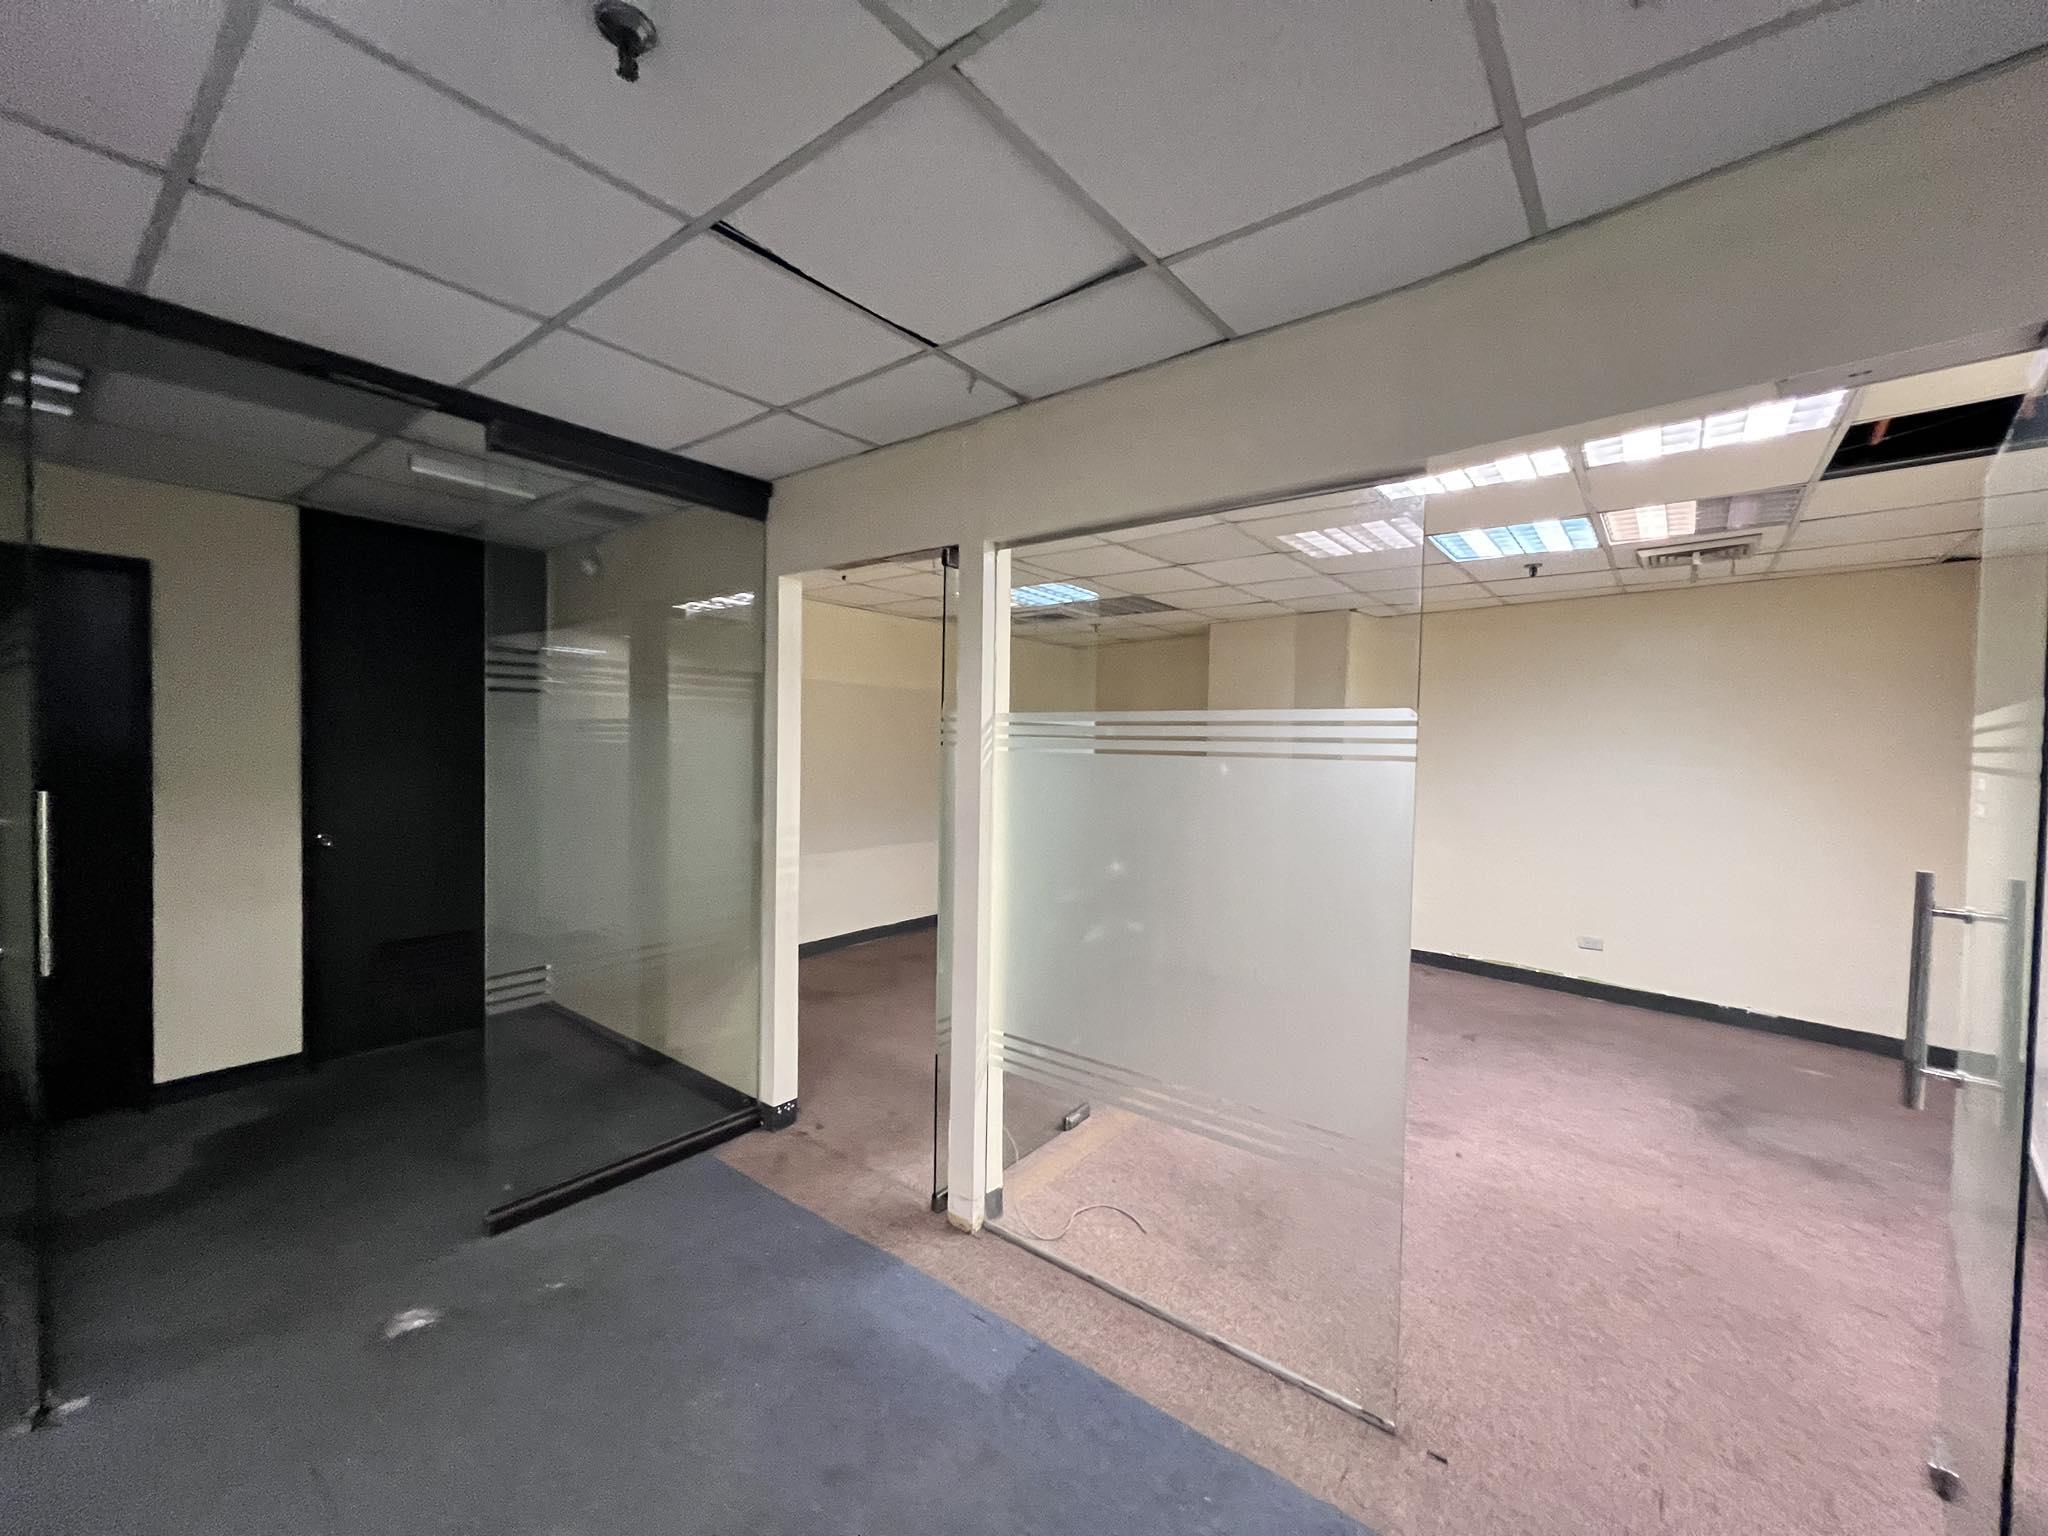 For Rent Lease Office Space 150 sqm Makati City Manila